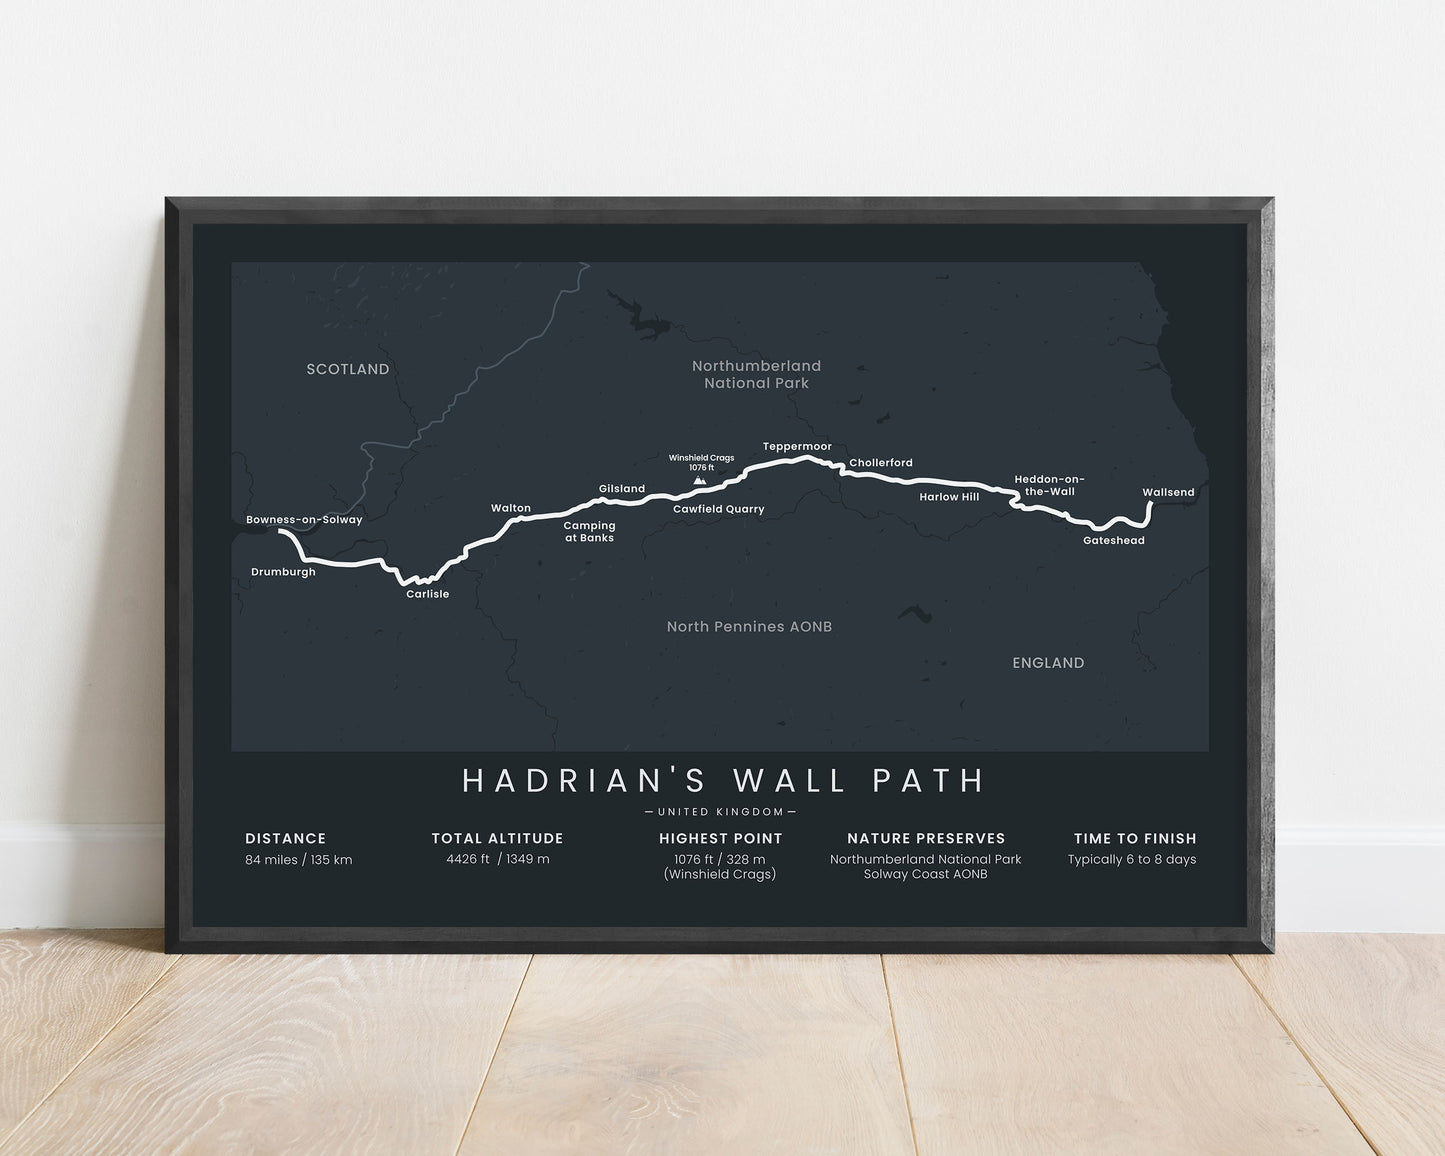 Hadrian's Wall Path National Trail (Northern England) path wall map with black background